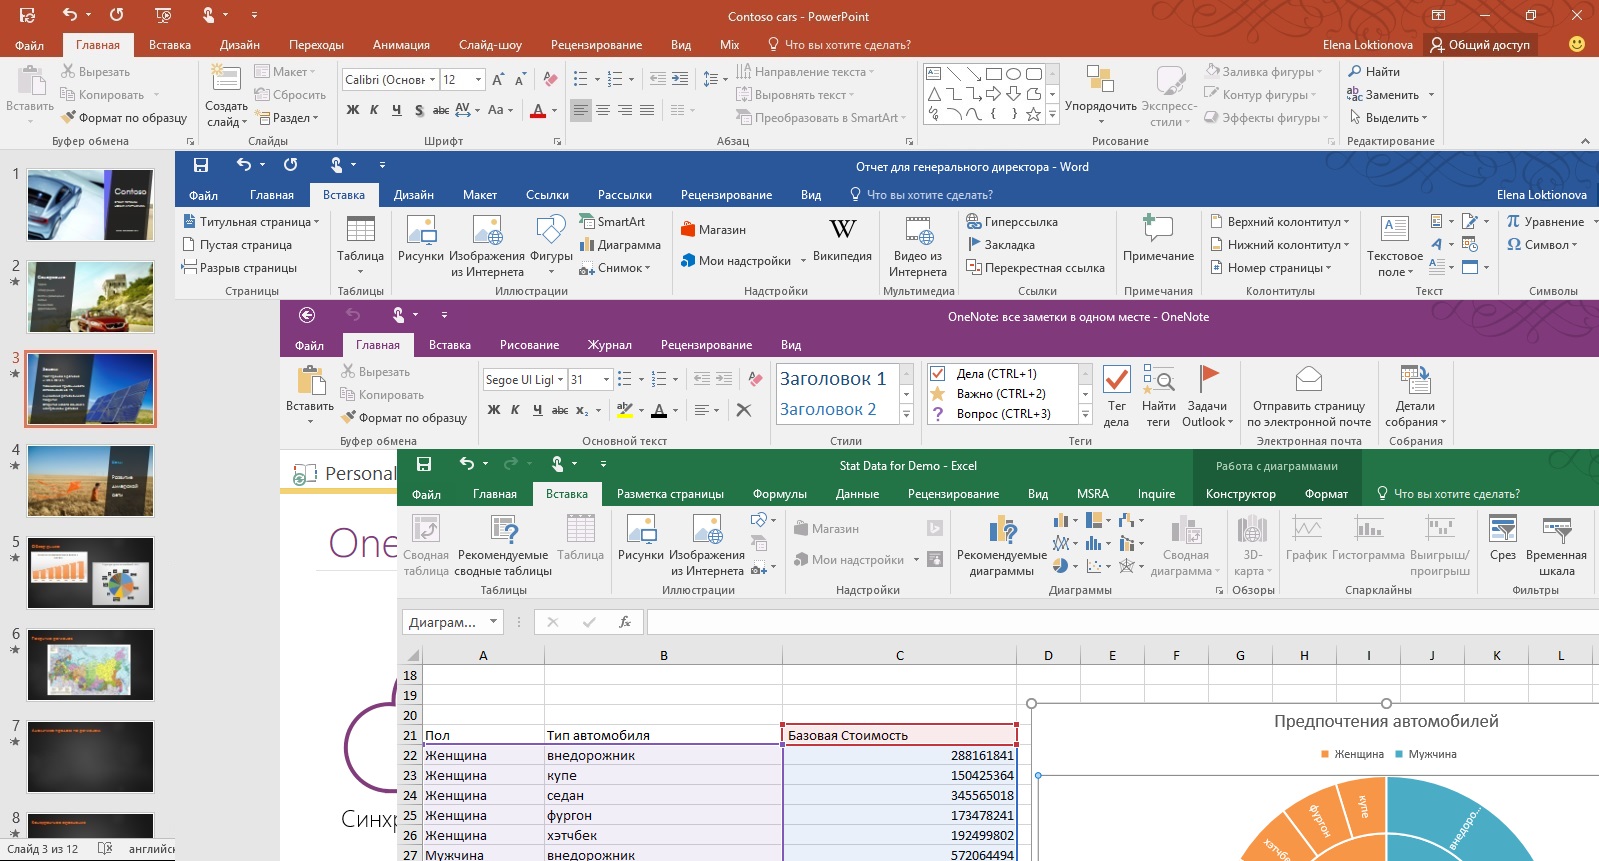 free download microsoft office 2016 for windows 10 64 bit with crack